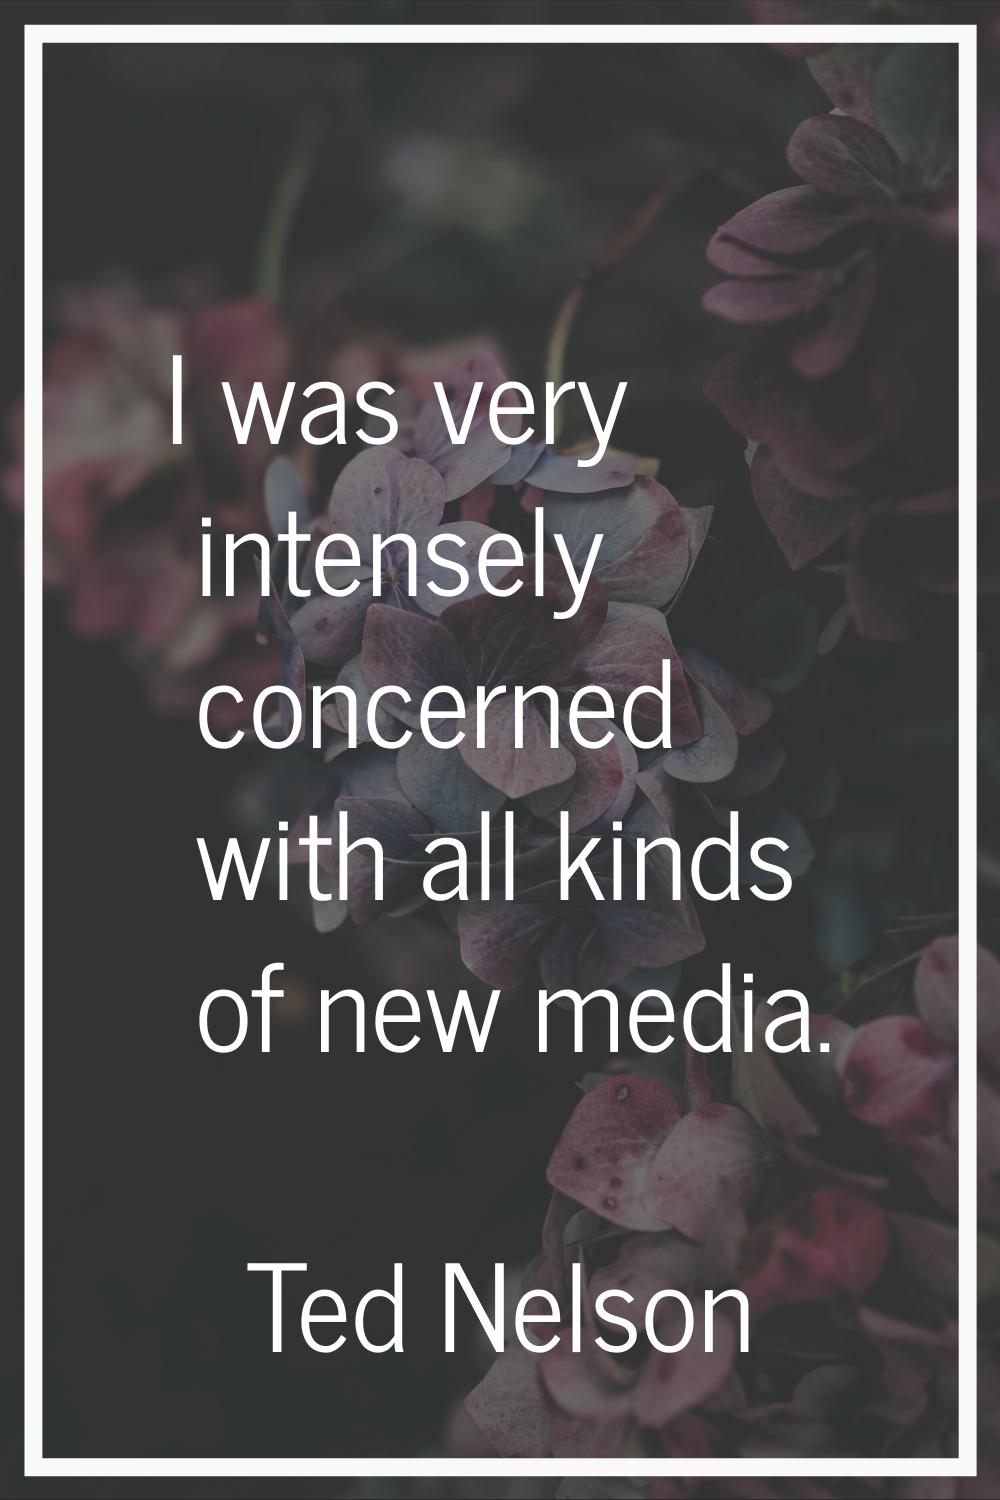 I was very intensely concerned with all kinds of new media.